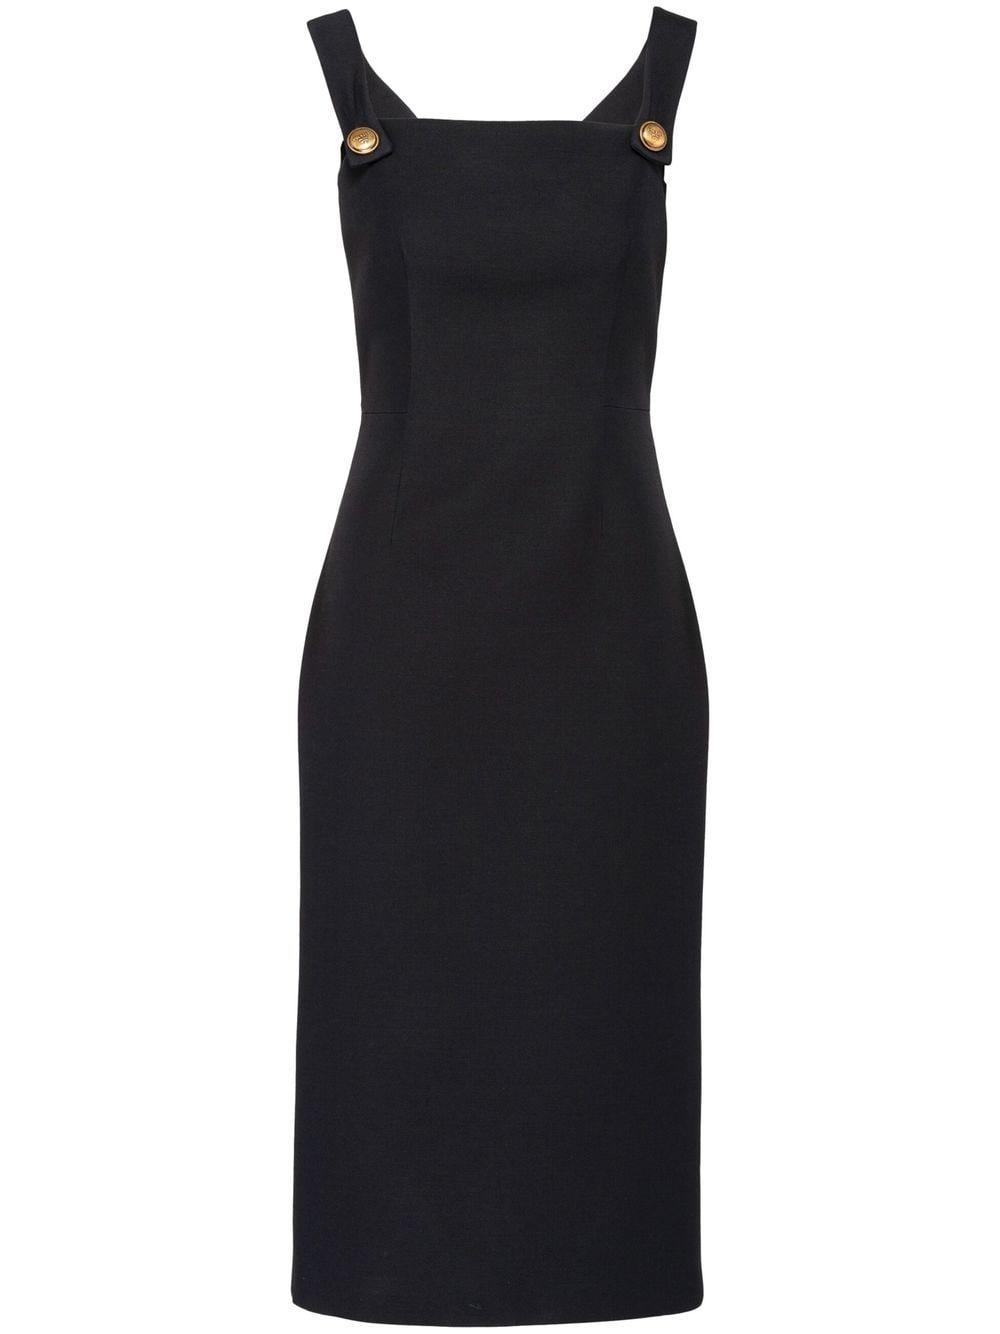 Prada Fitted Mid-length Dress in Black | Lyst